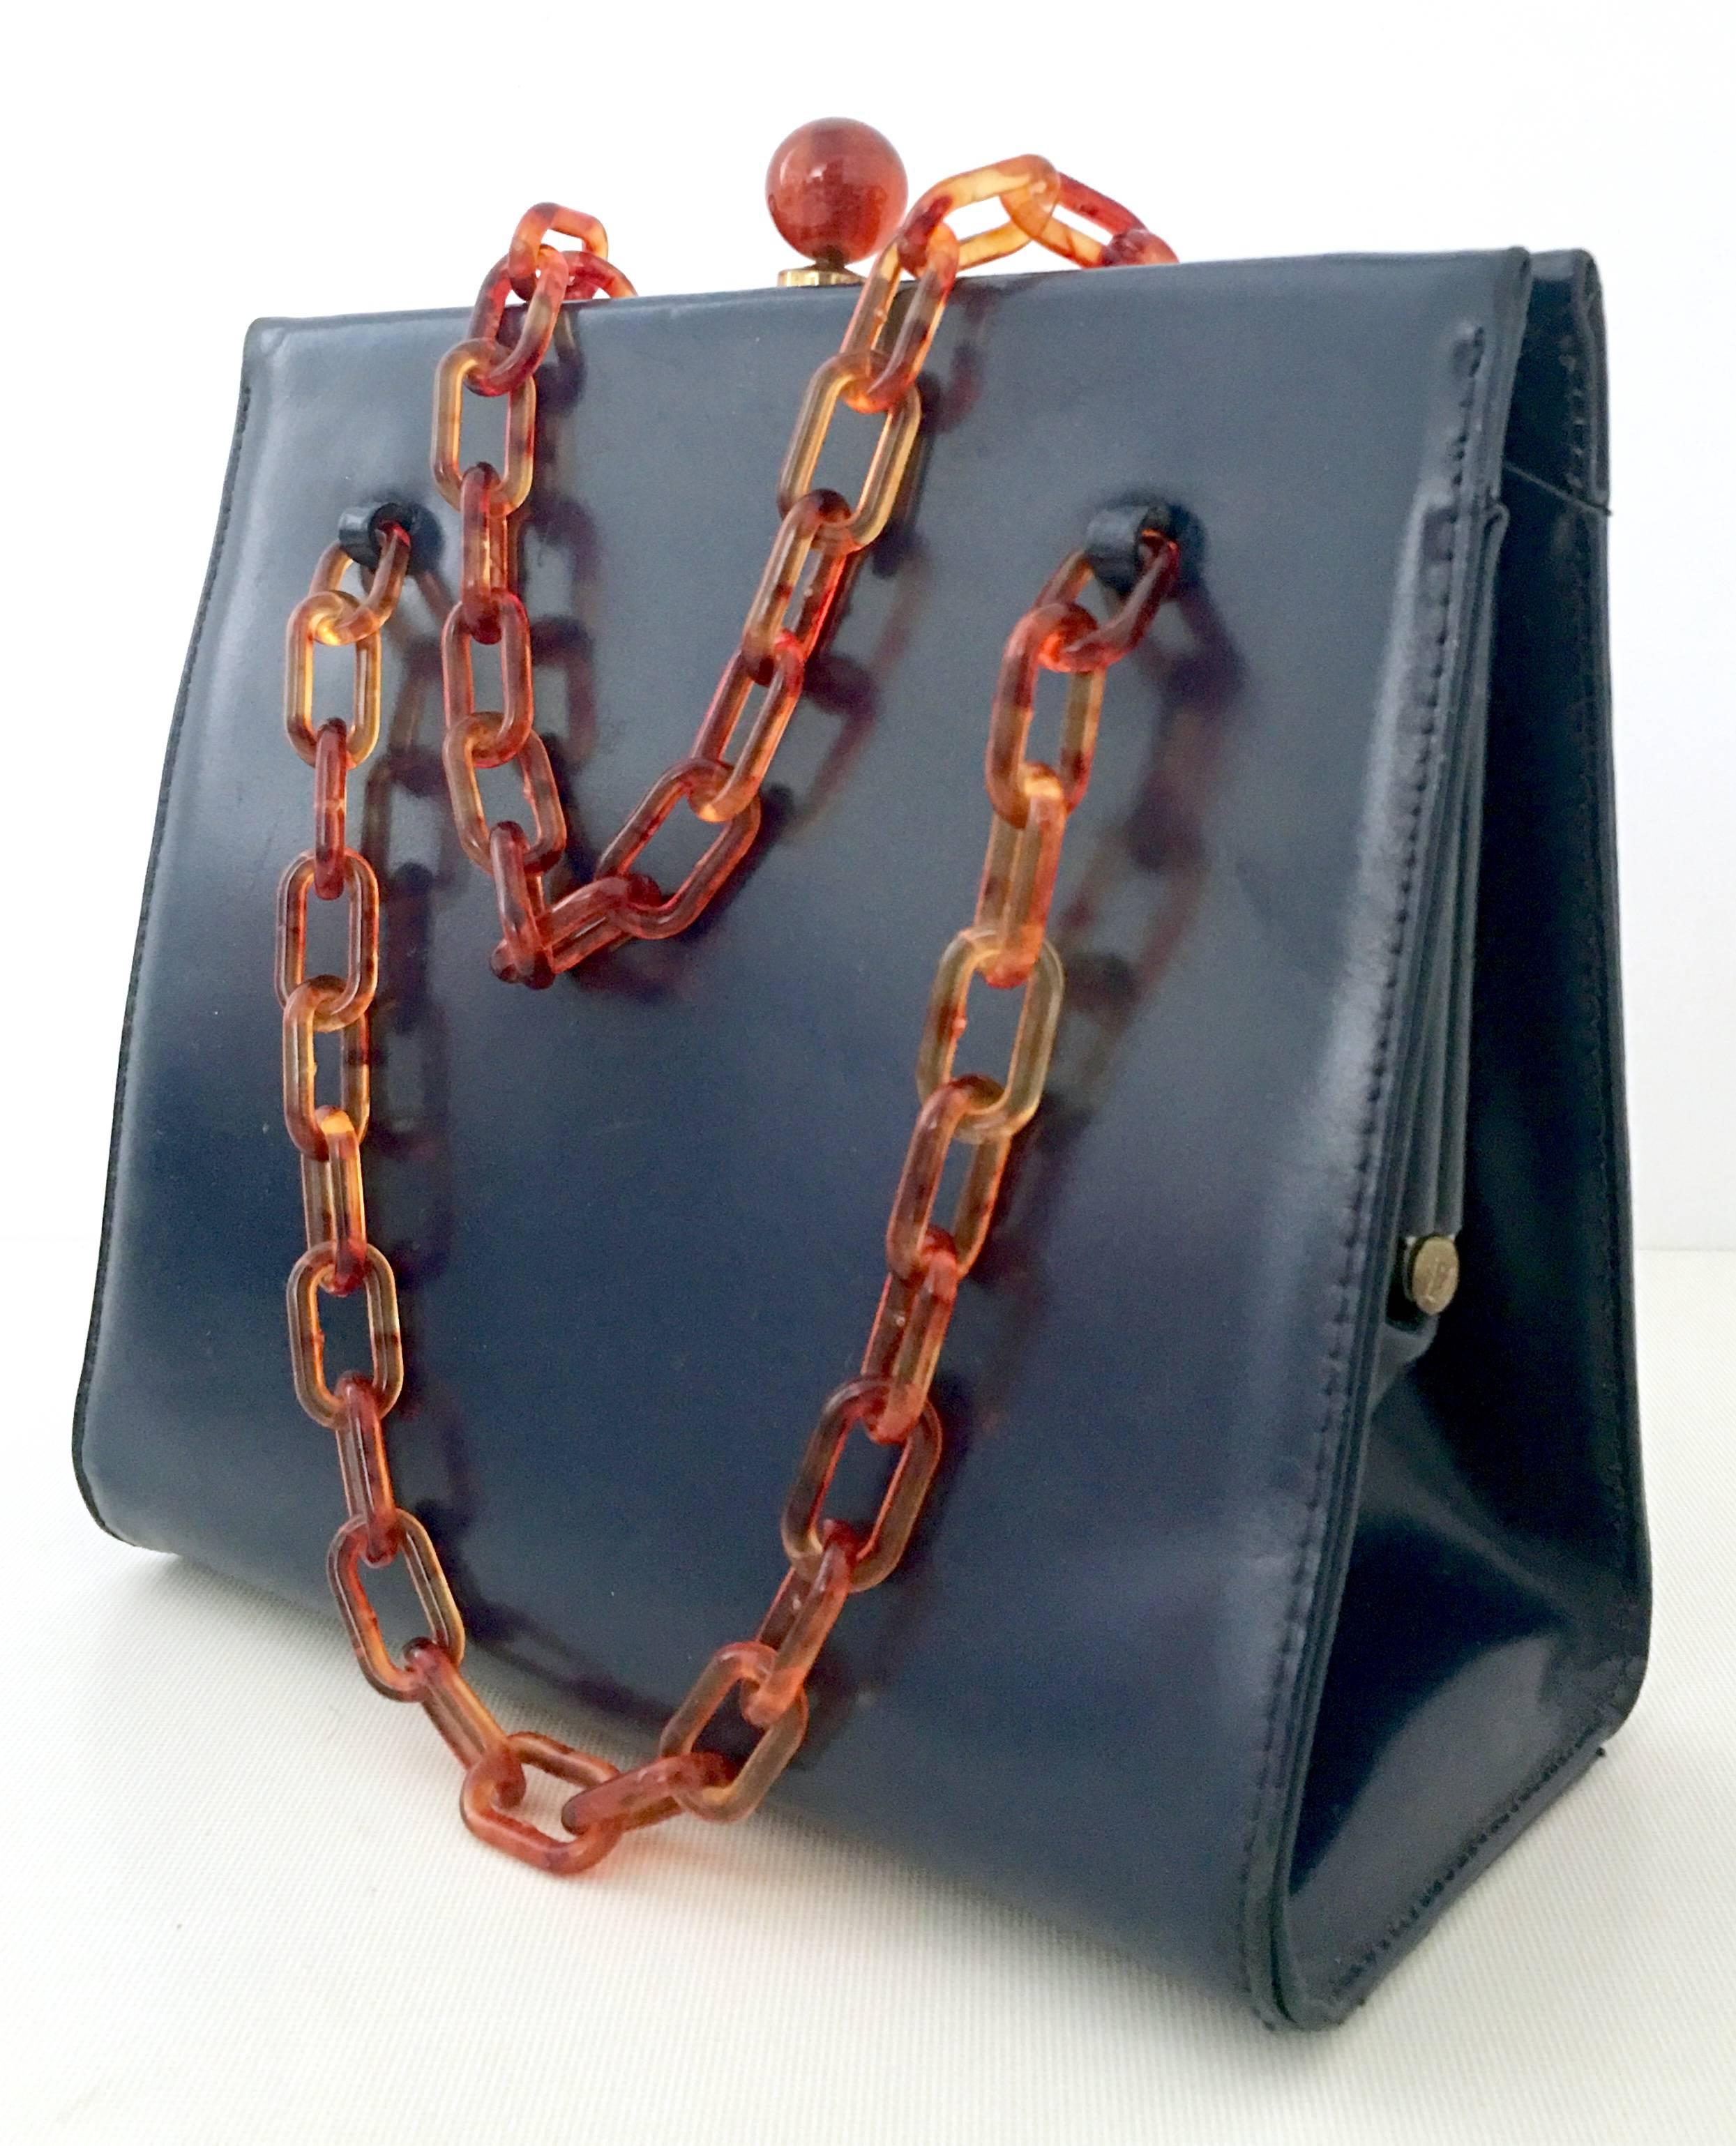 1950'S Navy Blue Leather & Faux Tortoise Bakelite Hand Bag By, Dofan France. This coveted and rare hand bag features, brass detail with a double Bakelite faux tortoise chain link shoulder strap and ball snap closure. There are four brass protective